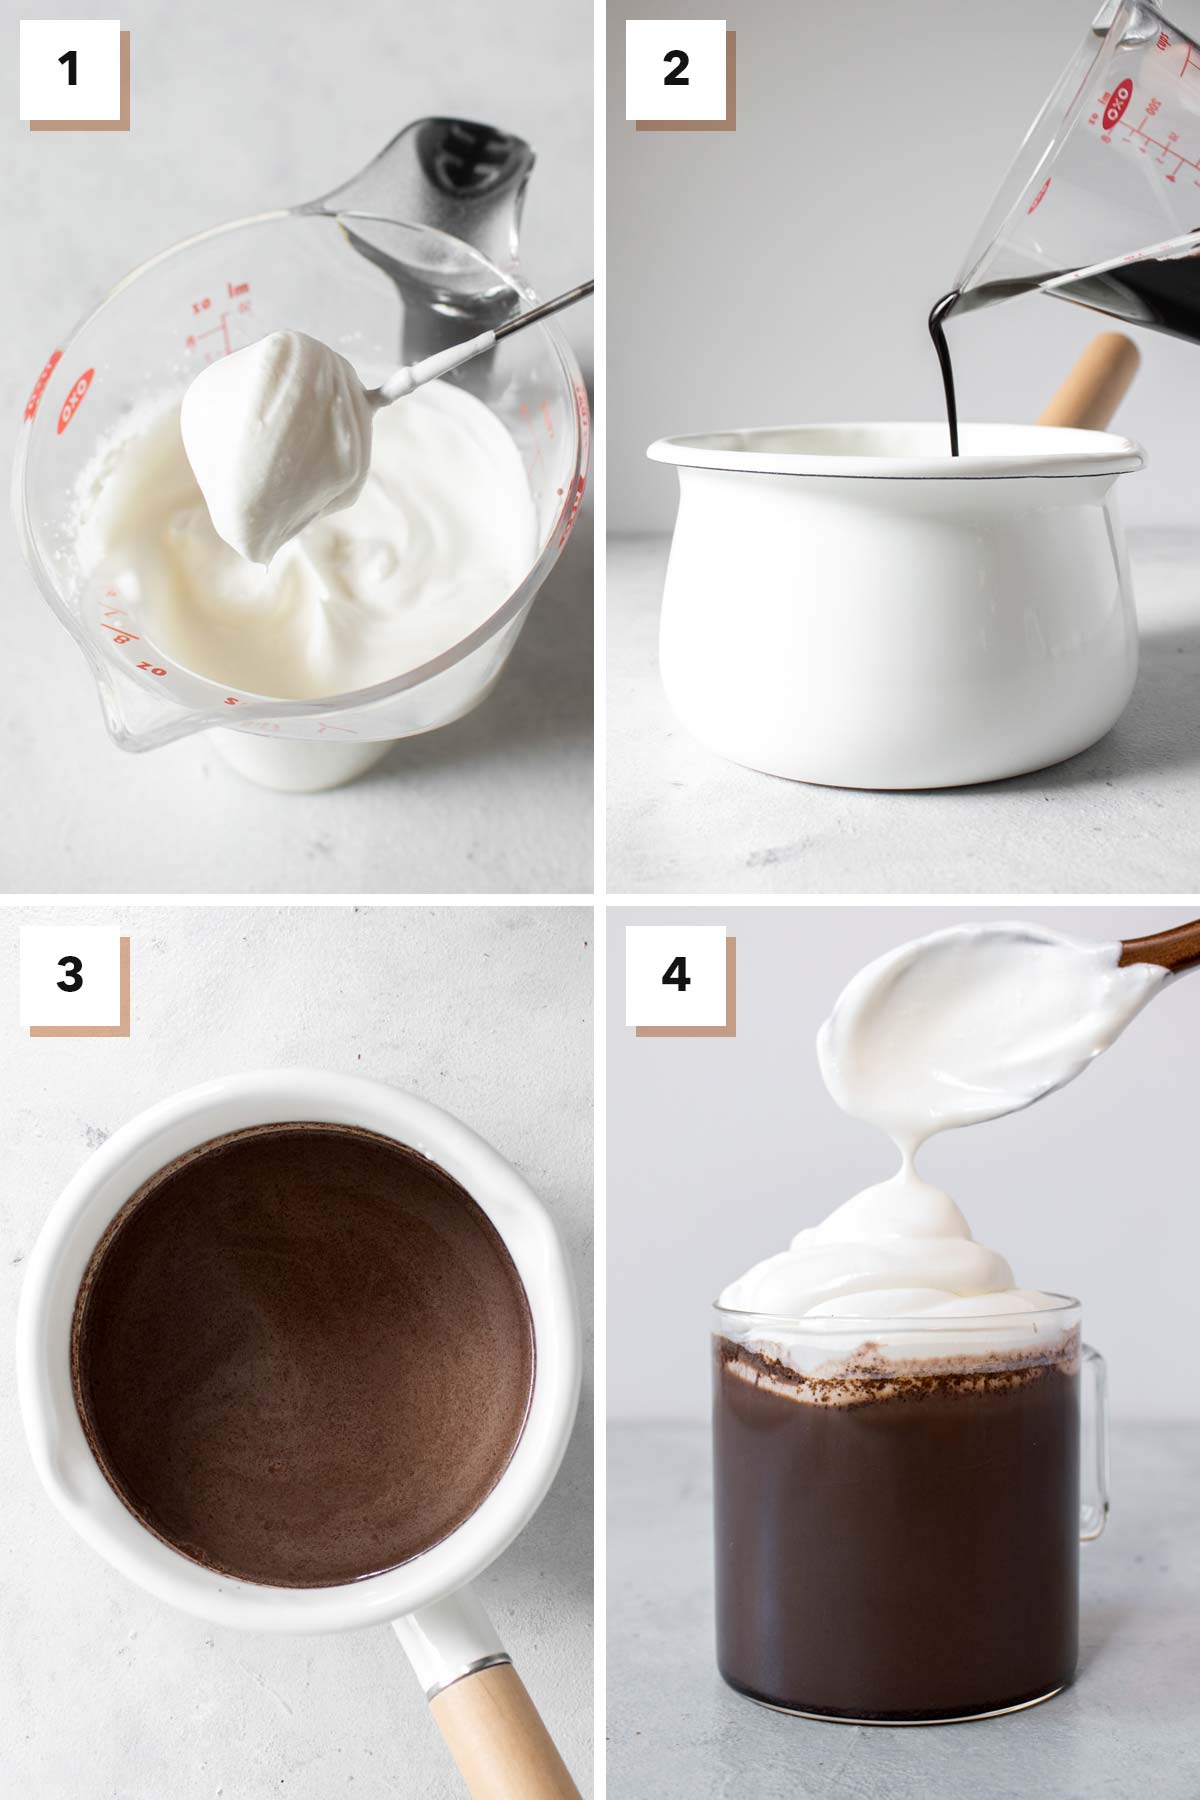 Four photos showing the steps to make Mexican hot chocolate.